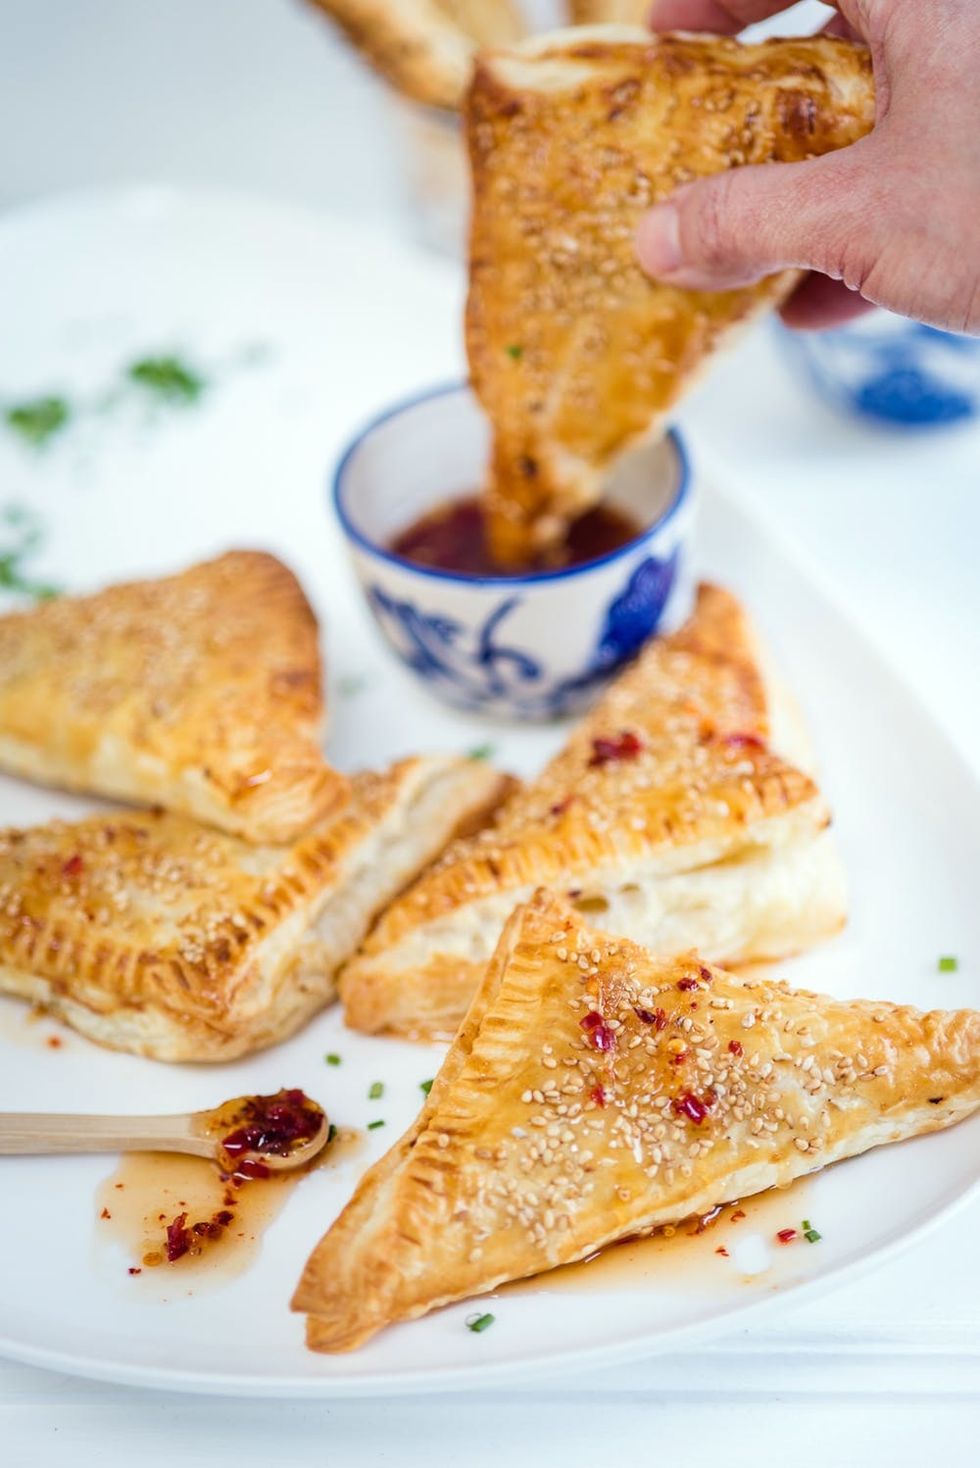  The Oscar for the tastiest app goes to... sesame shrimp puffs with homemade sweet chilli sauce!